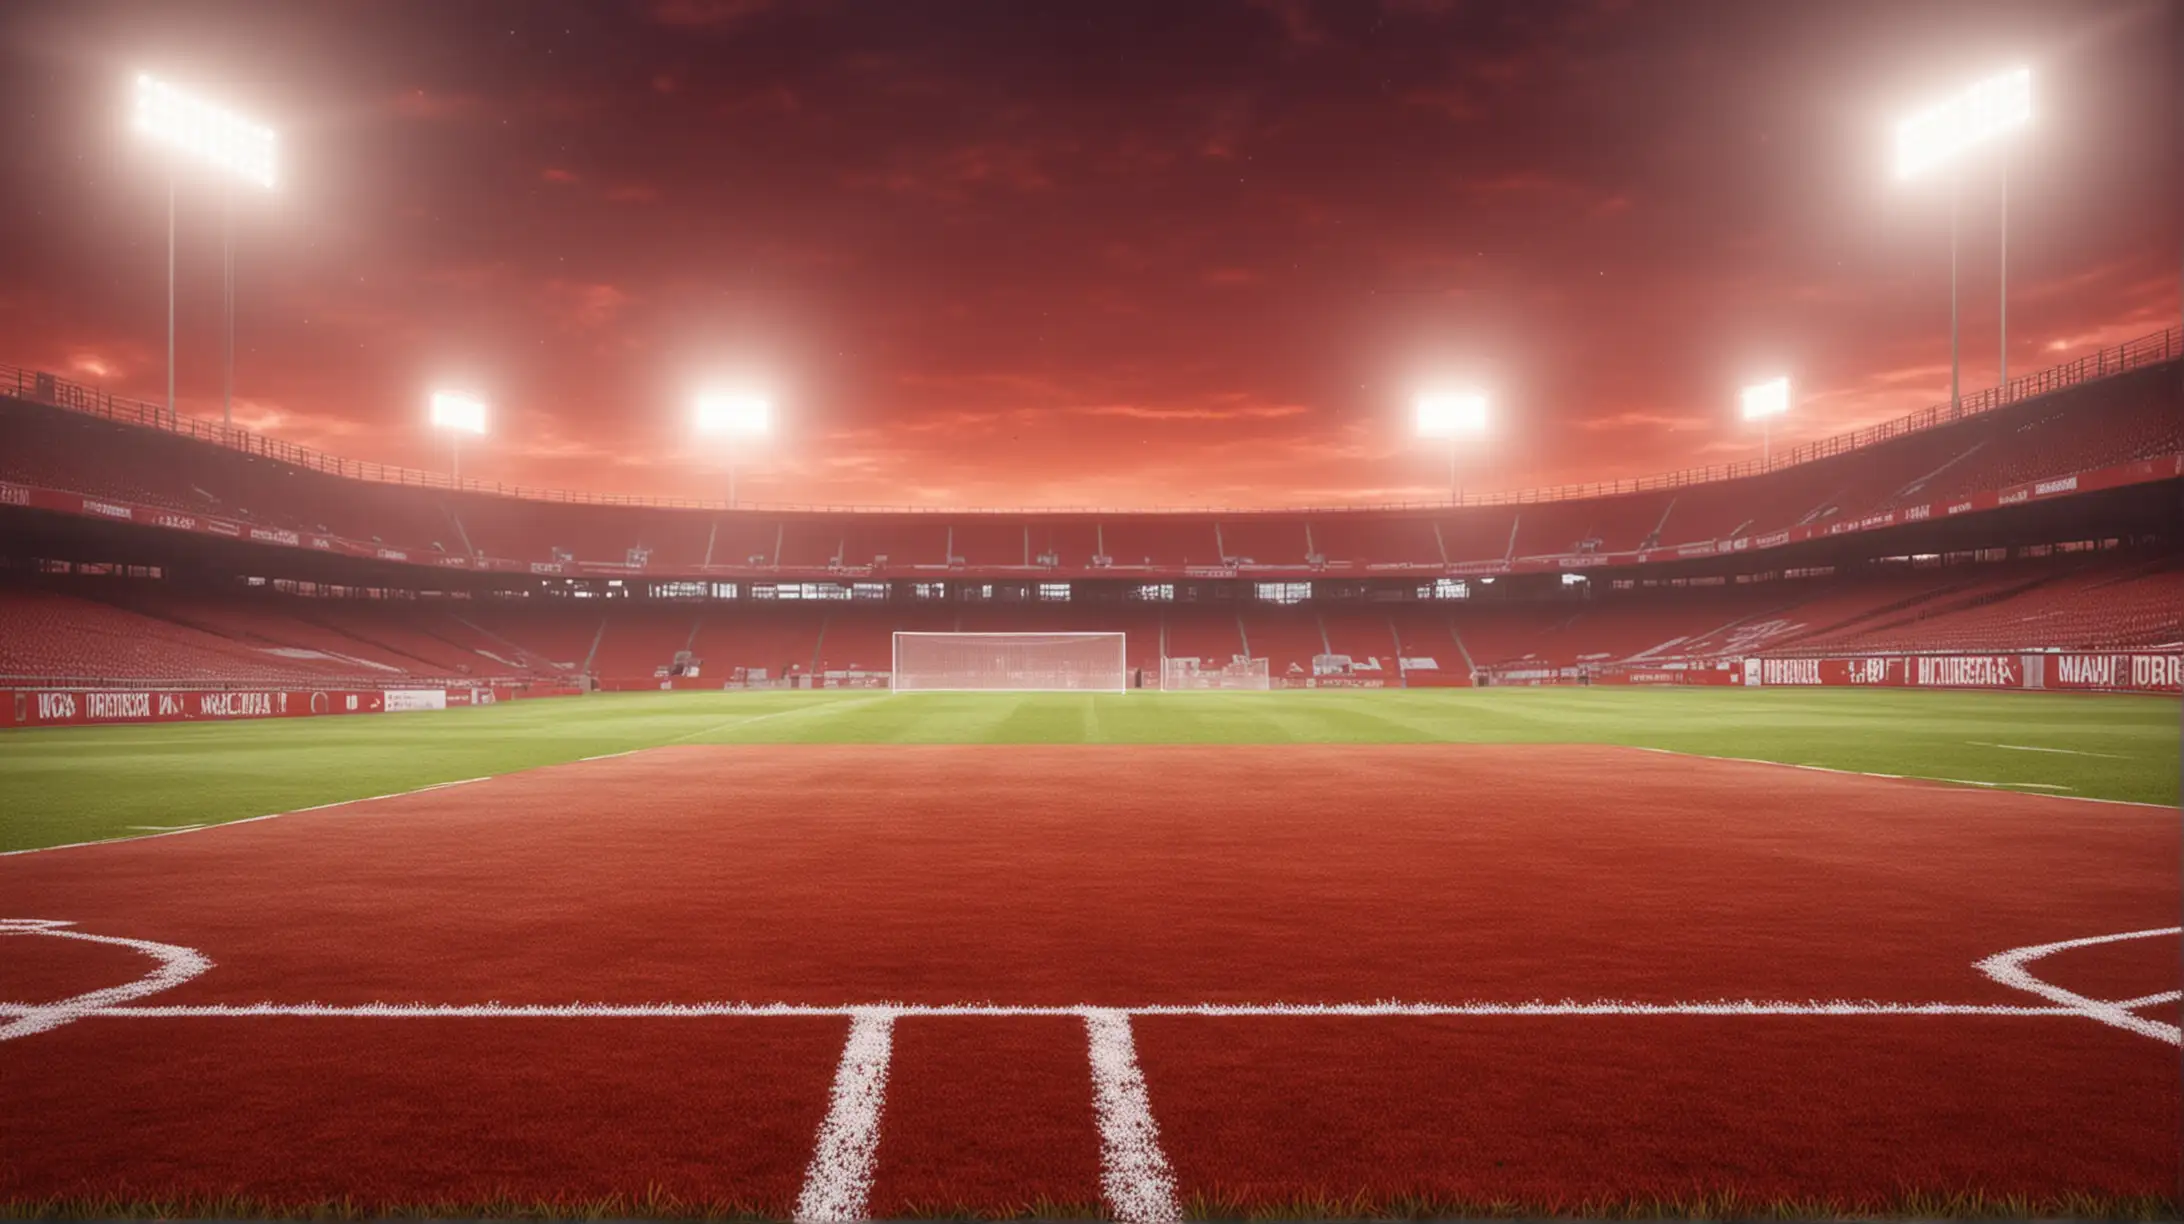 Vibrant Football Field Scene with Red Tones in Stunning 4K HD